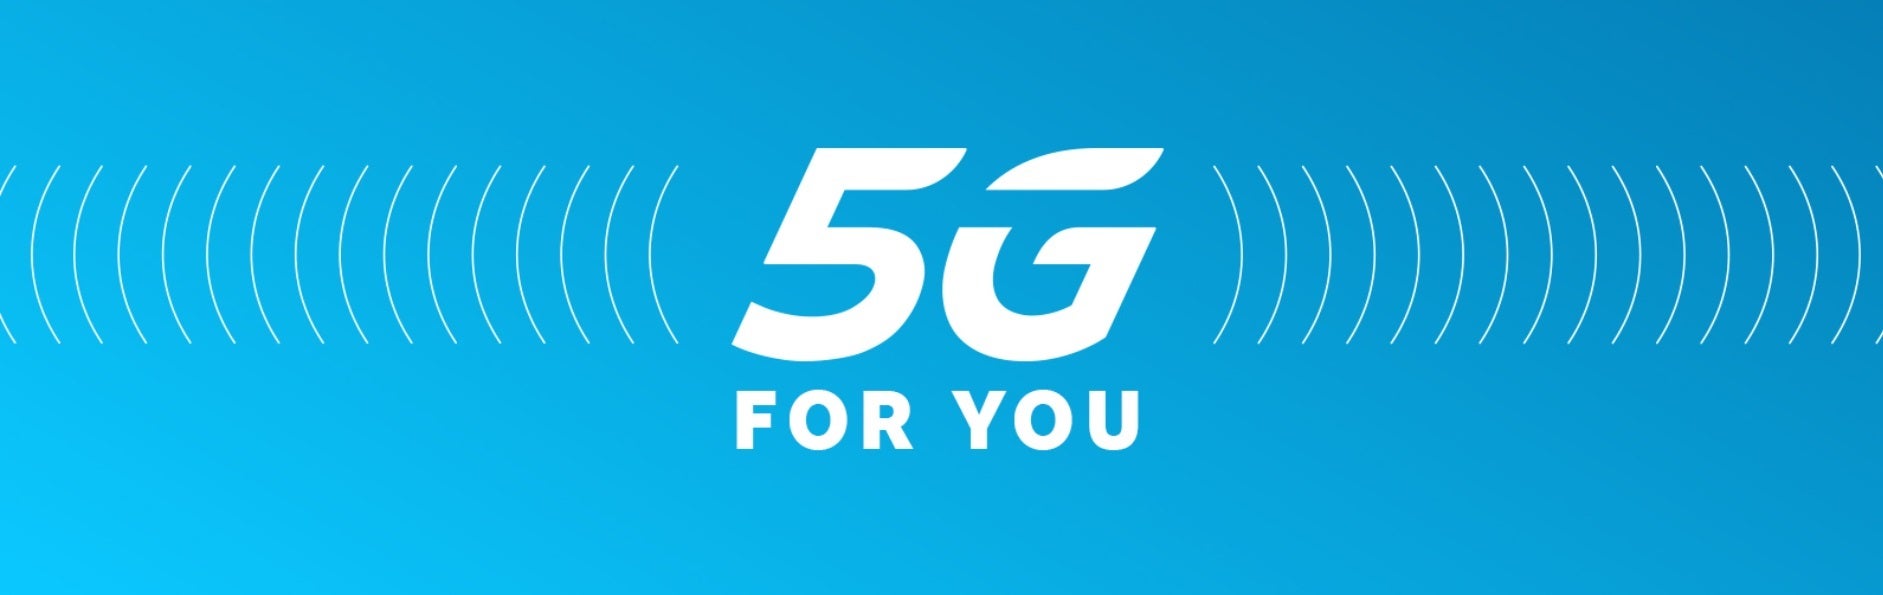 AT&amp;T recently increased the number of markets served by its consumer 5G service by 90% - U.S. carriers refuse to divulge this information about their 5G networks